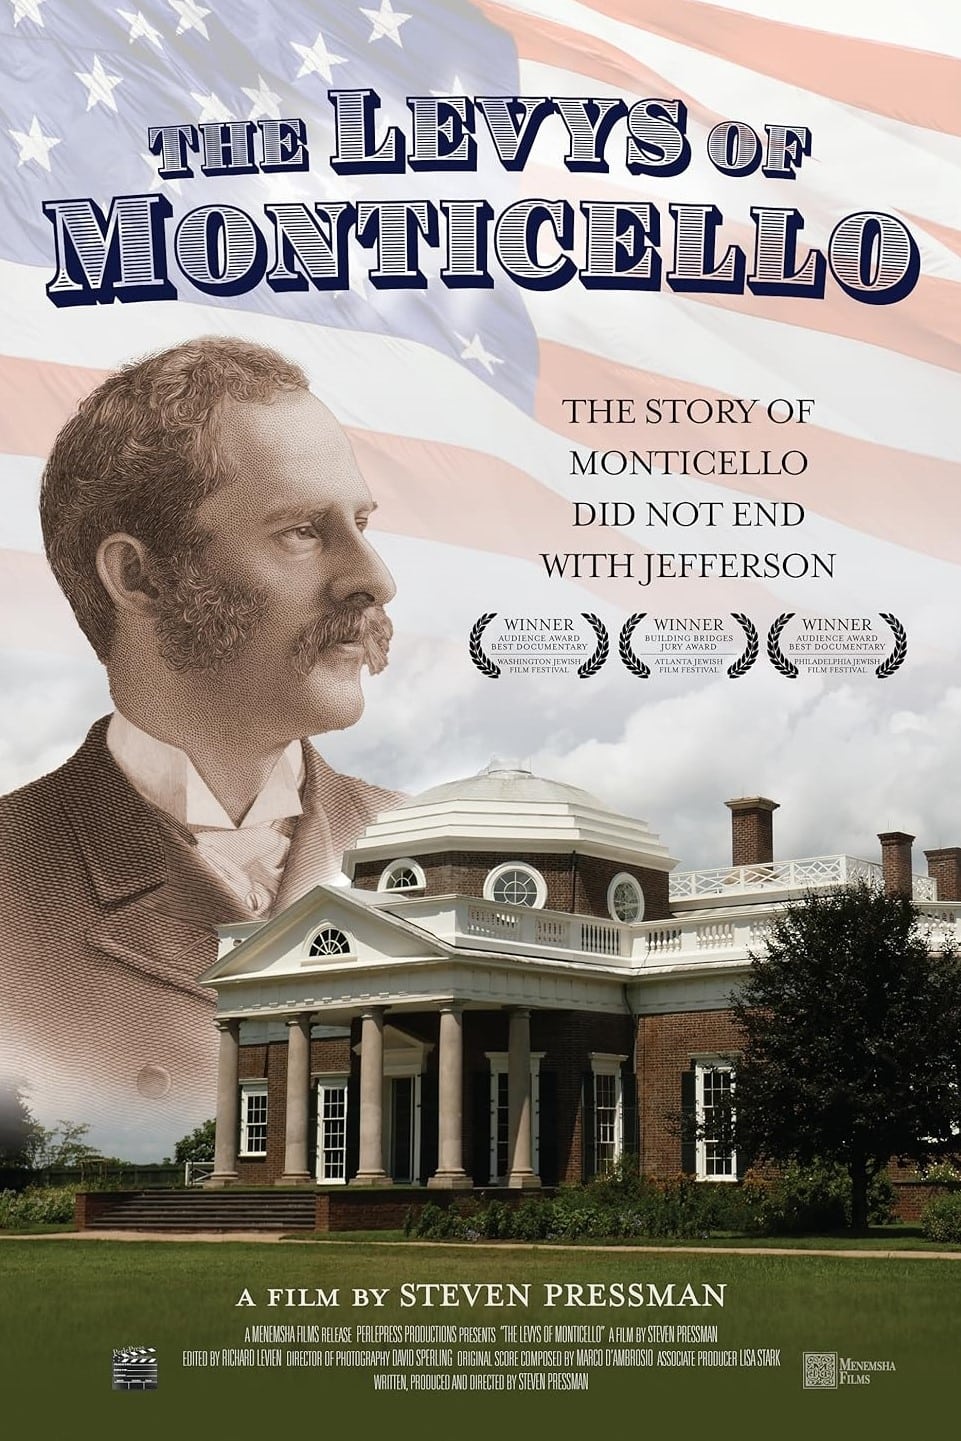 The Levys of Monticello